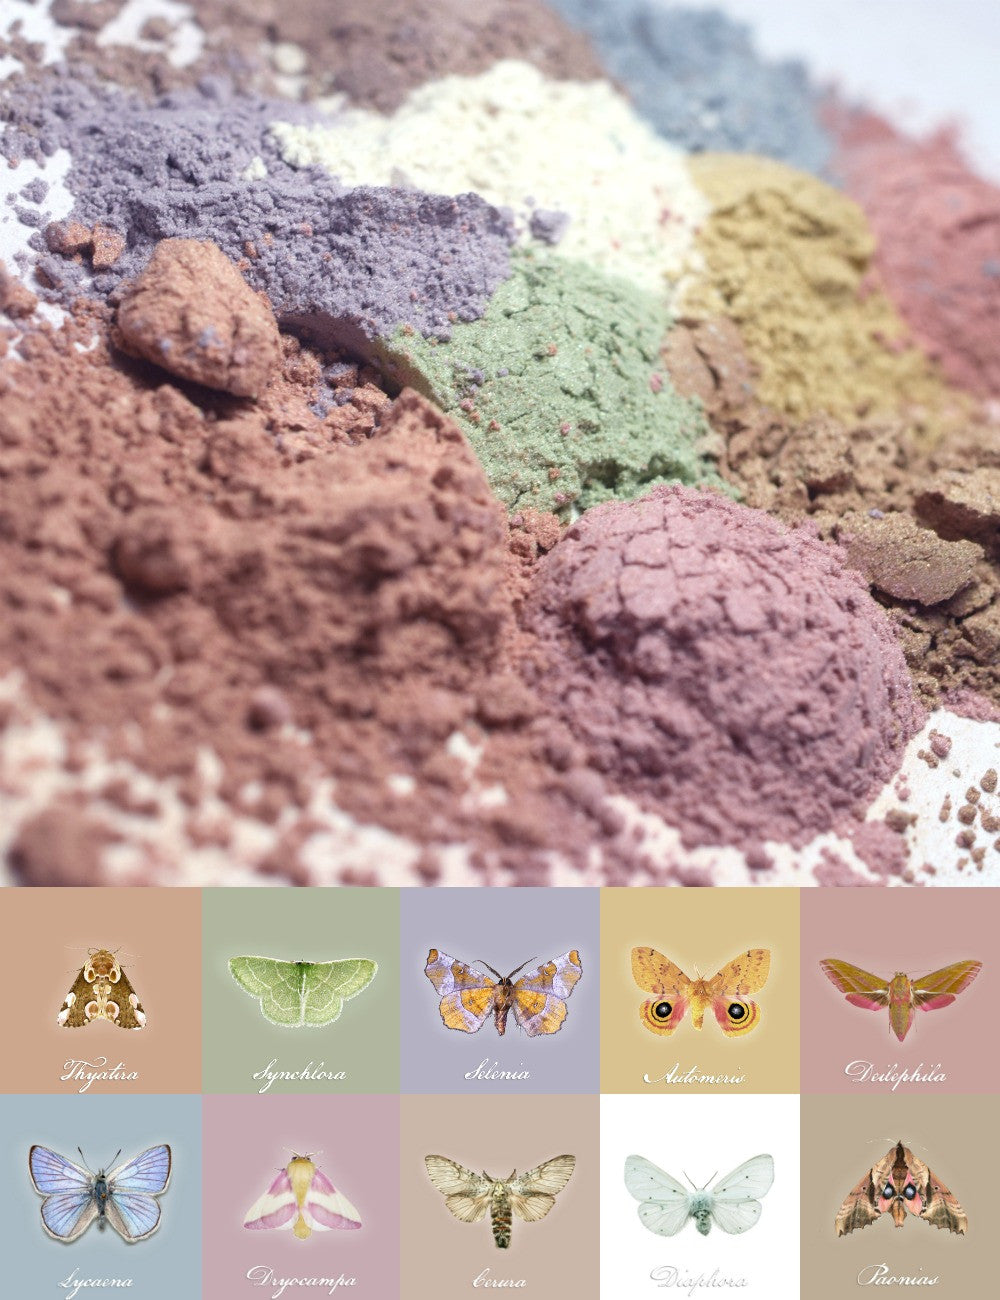 The Insectarium Multipurpose Lustre Highlighters are now available!